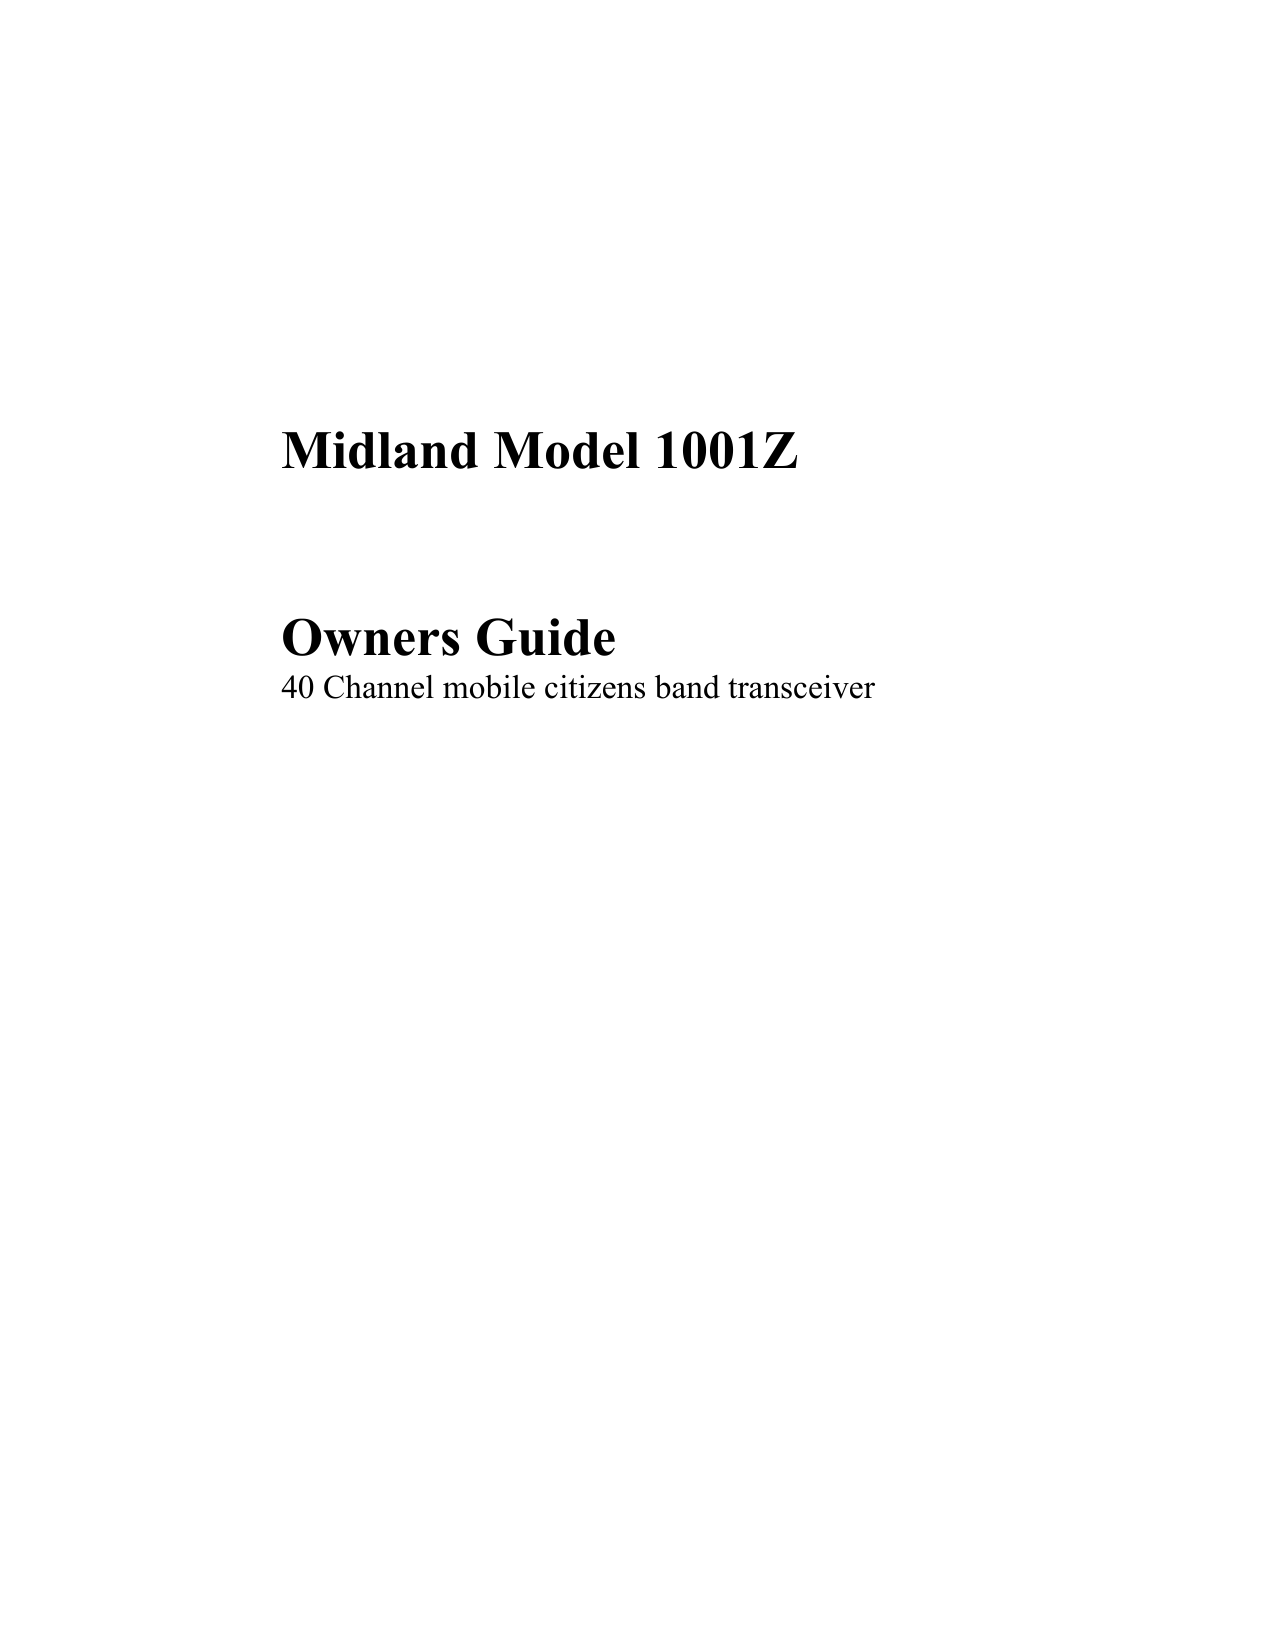       Midland Model 1001Z   Owners Guide 40 Channel mobile citizens band transceiver 